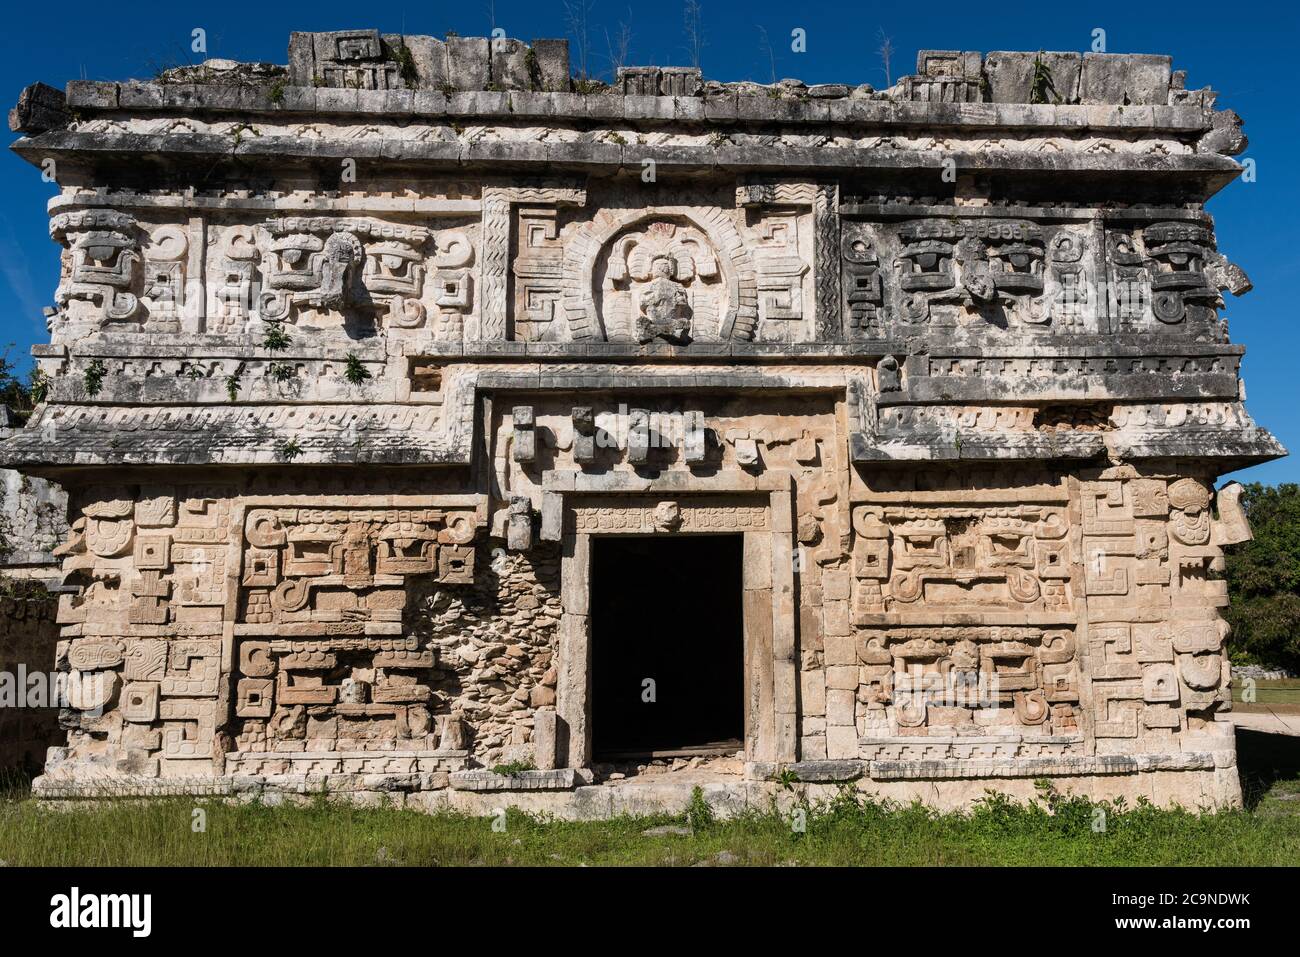 The ornately-carved facade of the Nunnery Complex with several Chaac masks in the ruins of the great Mayan city of Chichen Itza, Yucatan, Mexico. Stock Photo